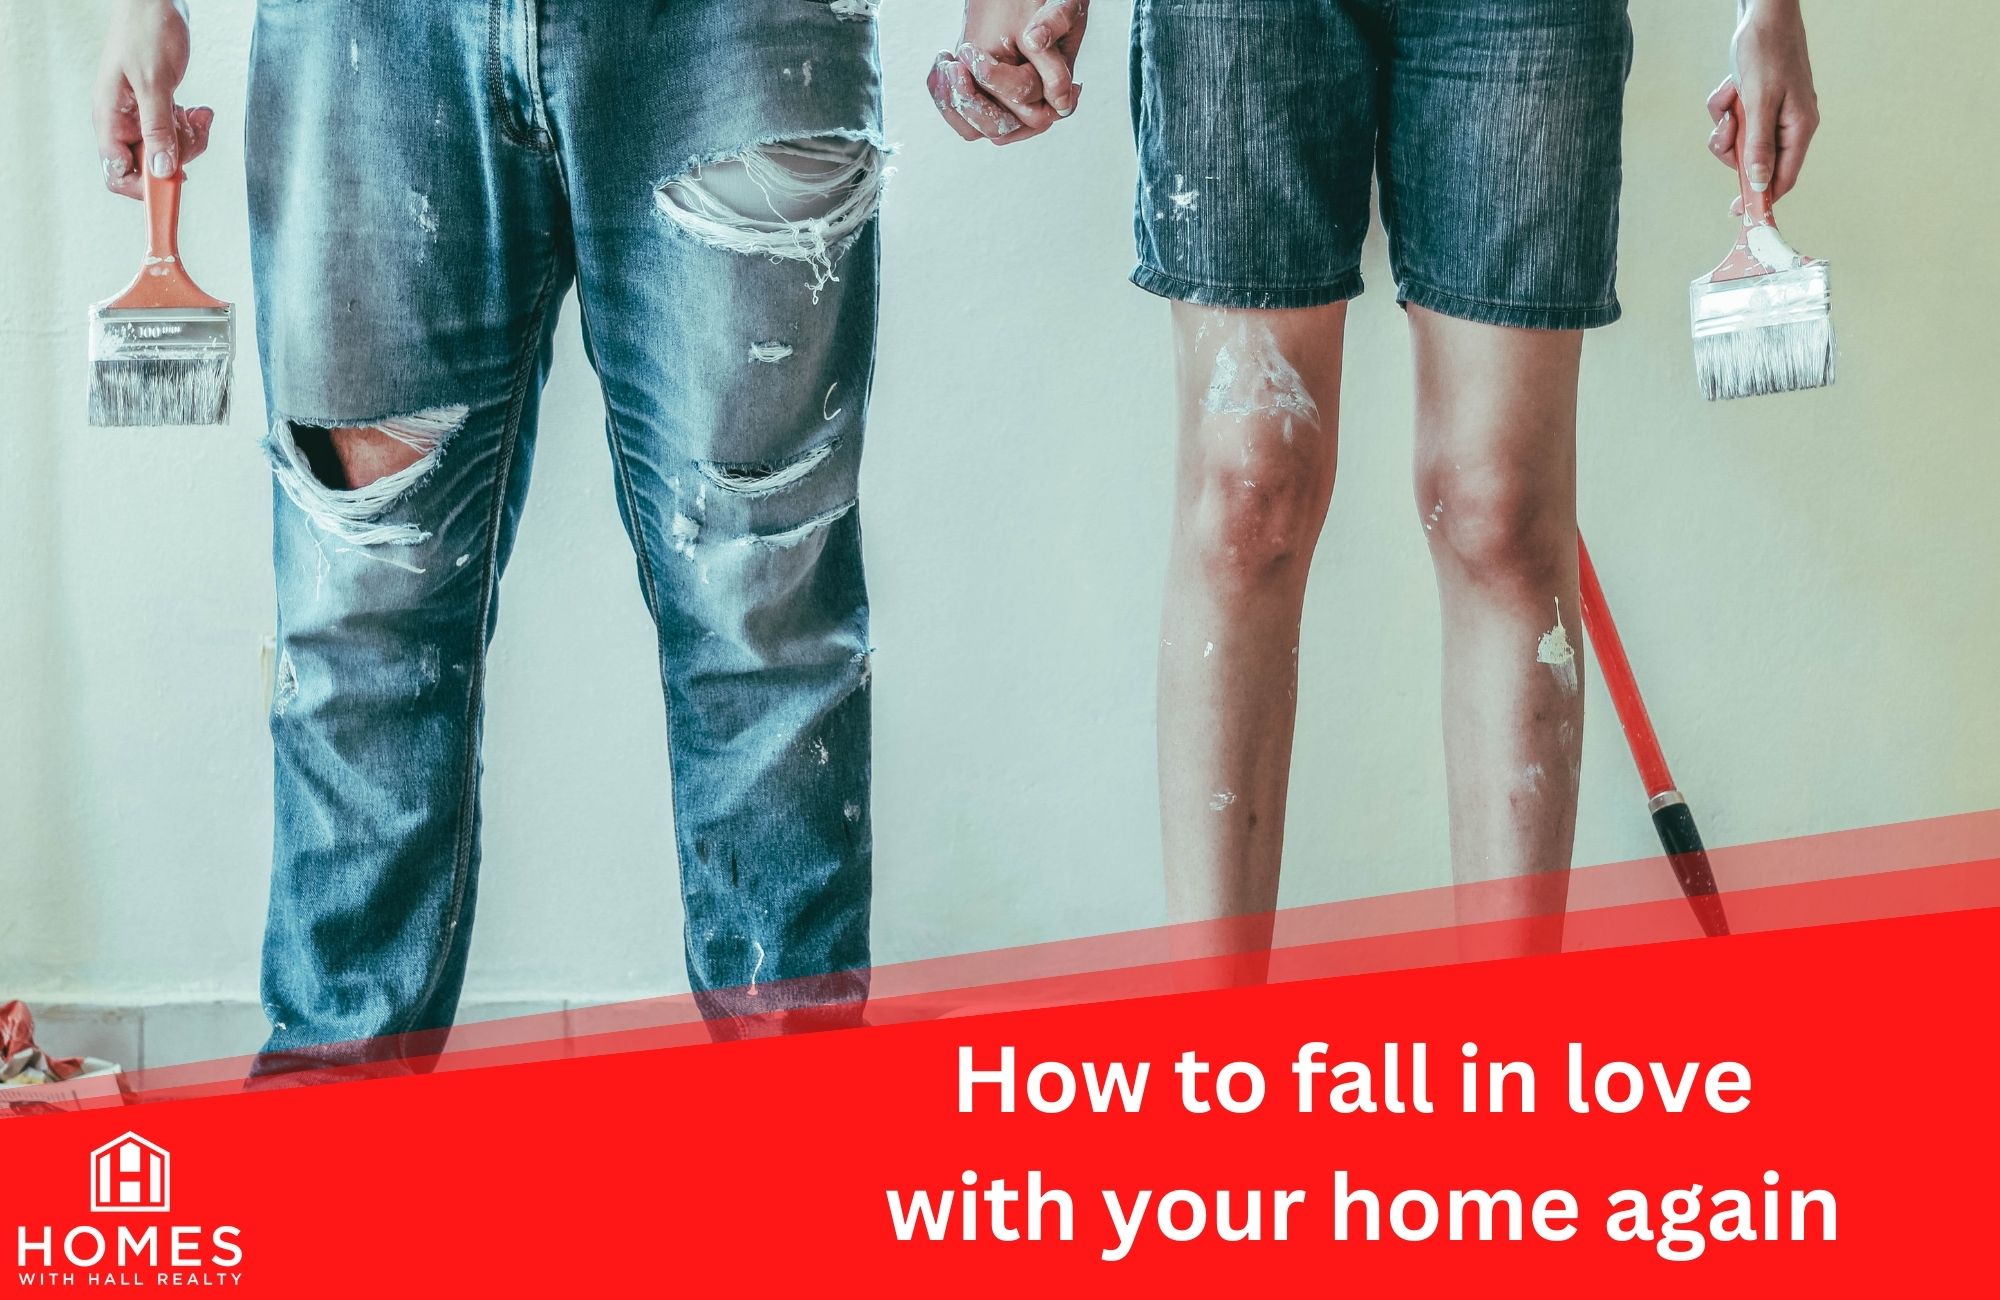 How to fall in love with your home again